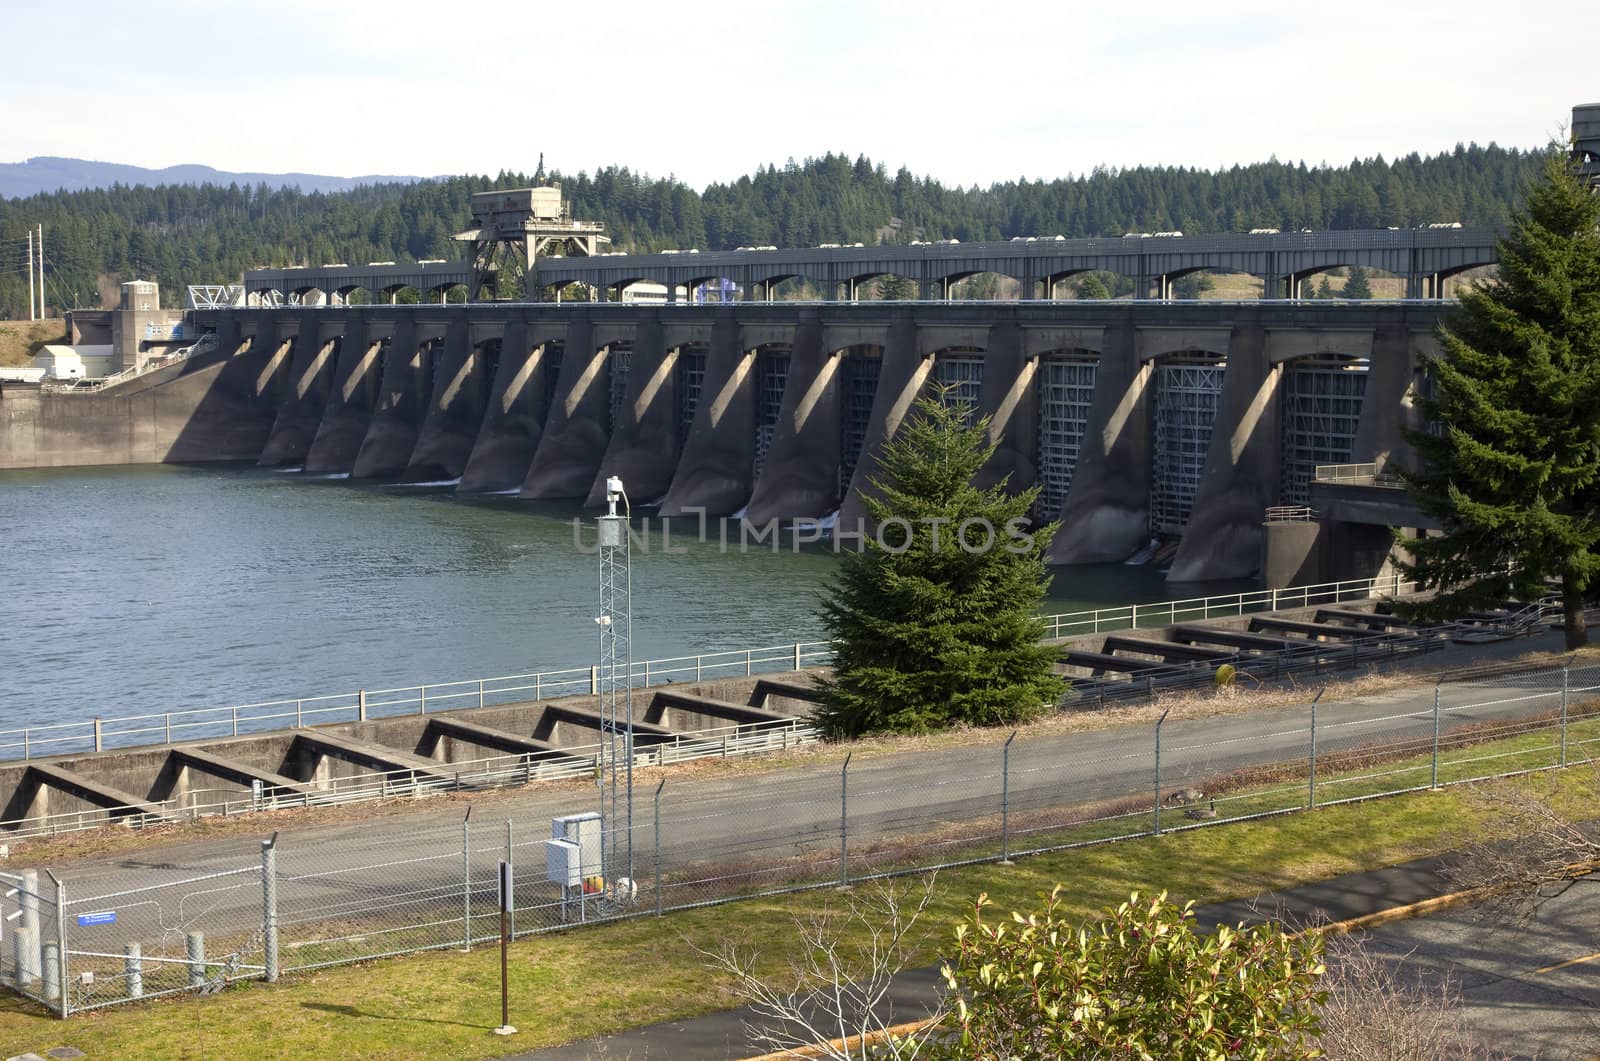 Bonneville dam and surroundings, Columbia River Gorge OR.